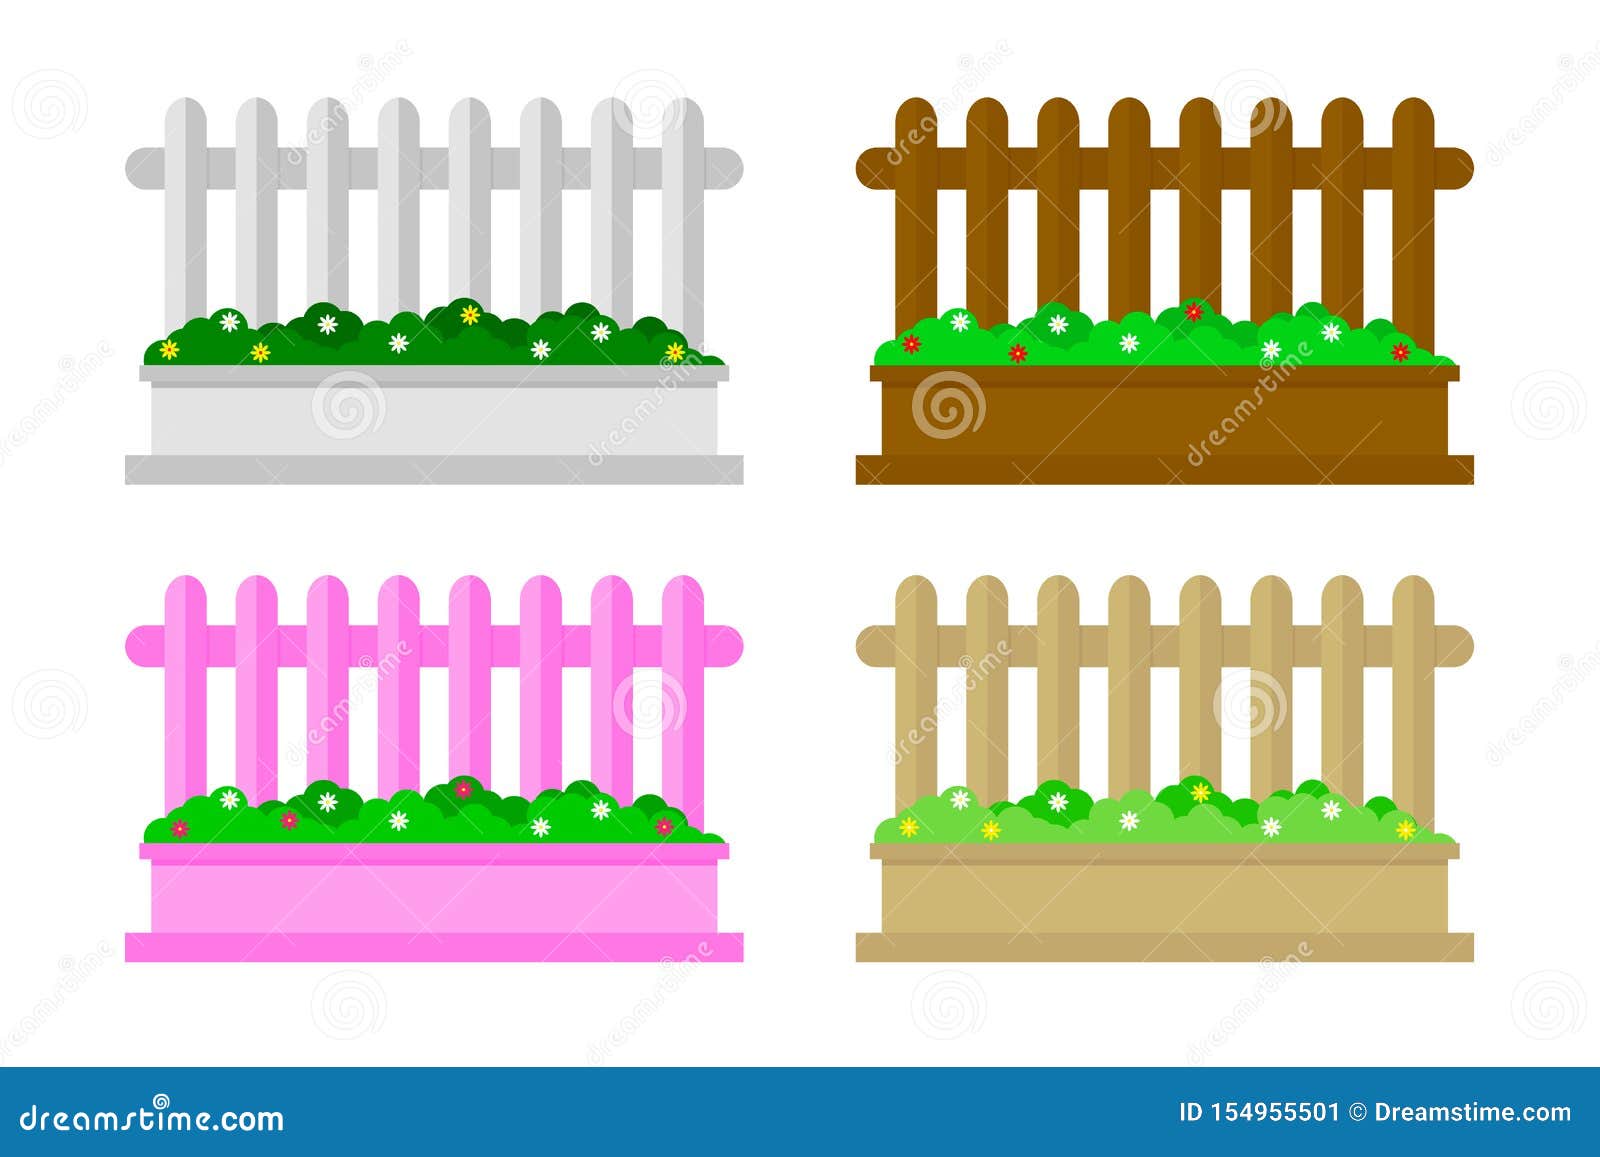 Decorative Fence Styles for 3 House Types  Farmhouse Colonial  More